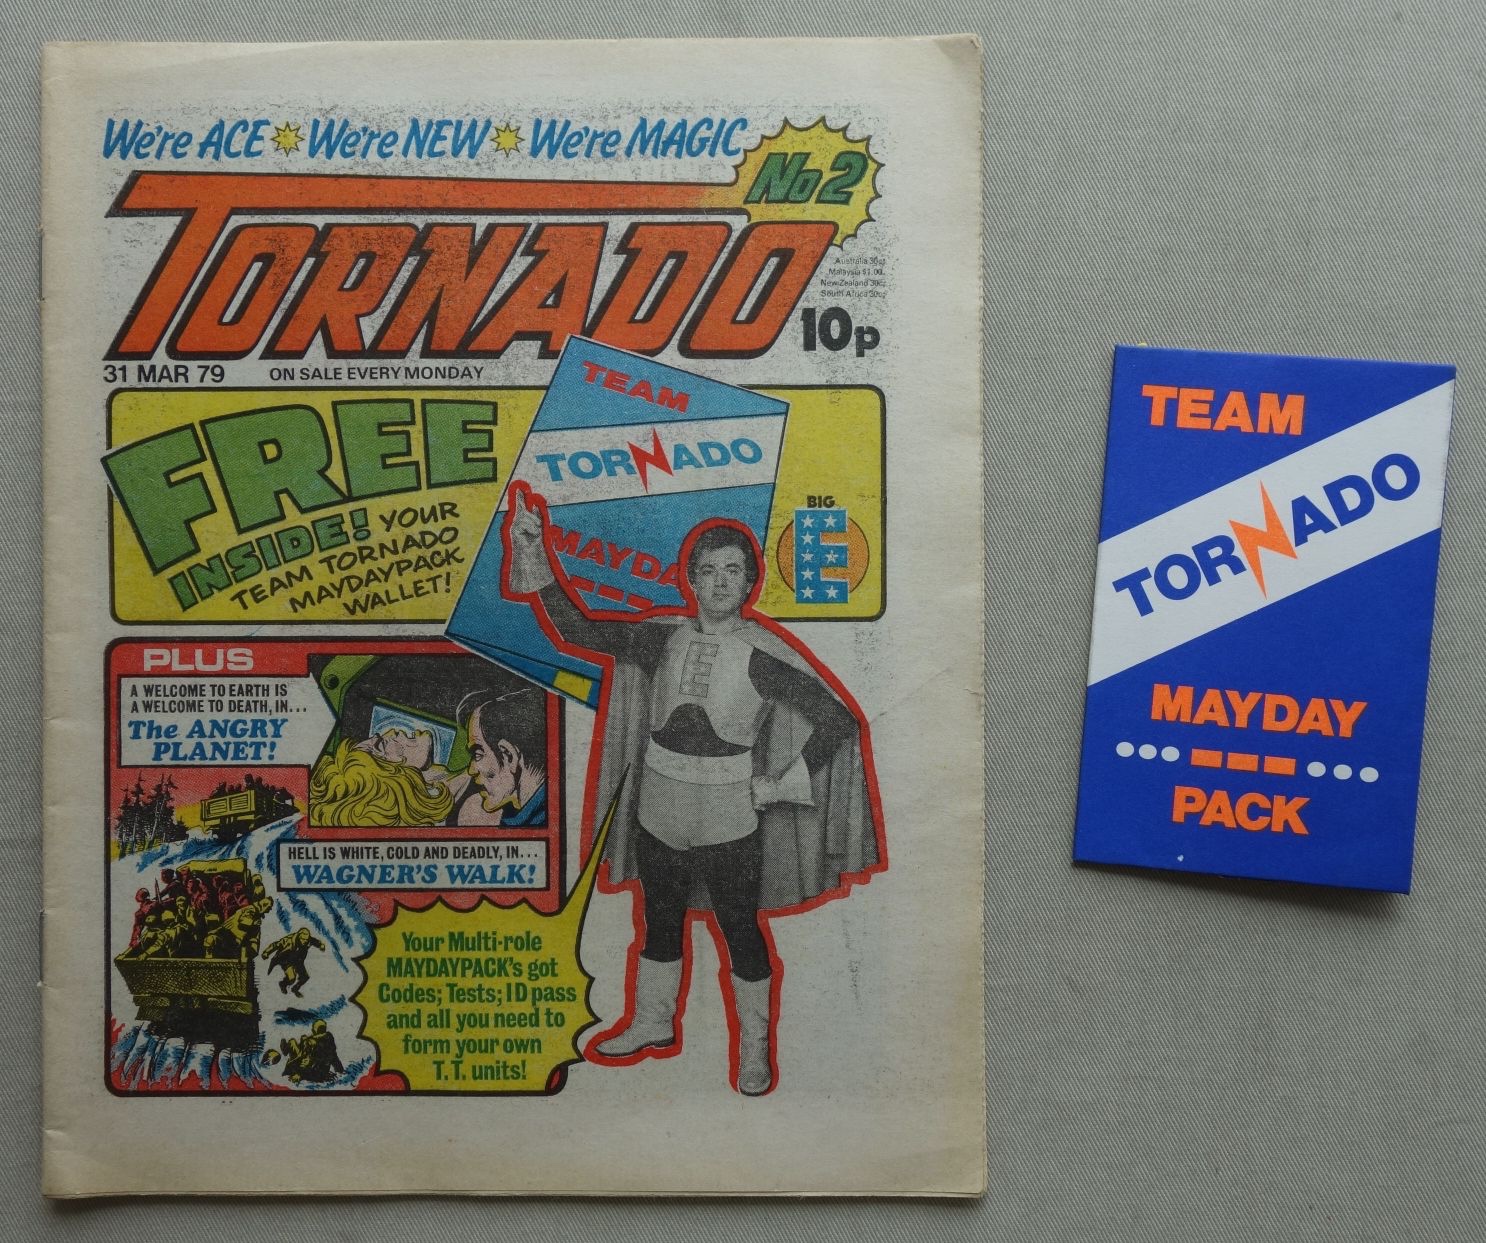 Tornado Issue 2 - cover dated 31st March 1979, with free gift